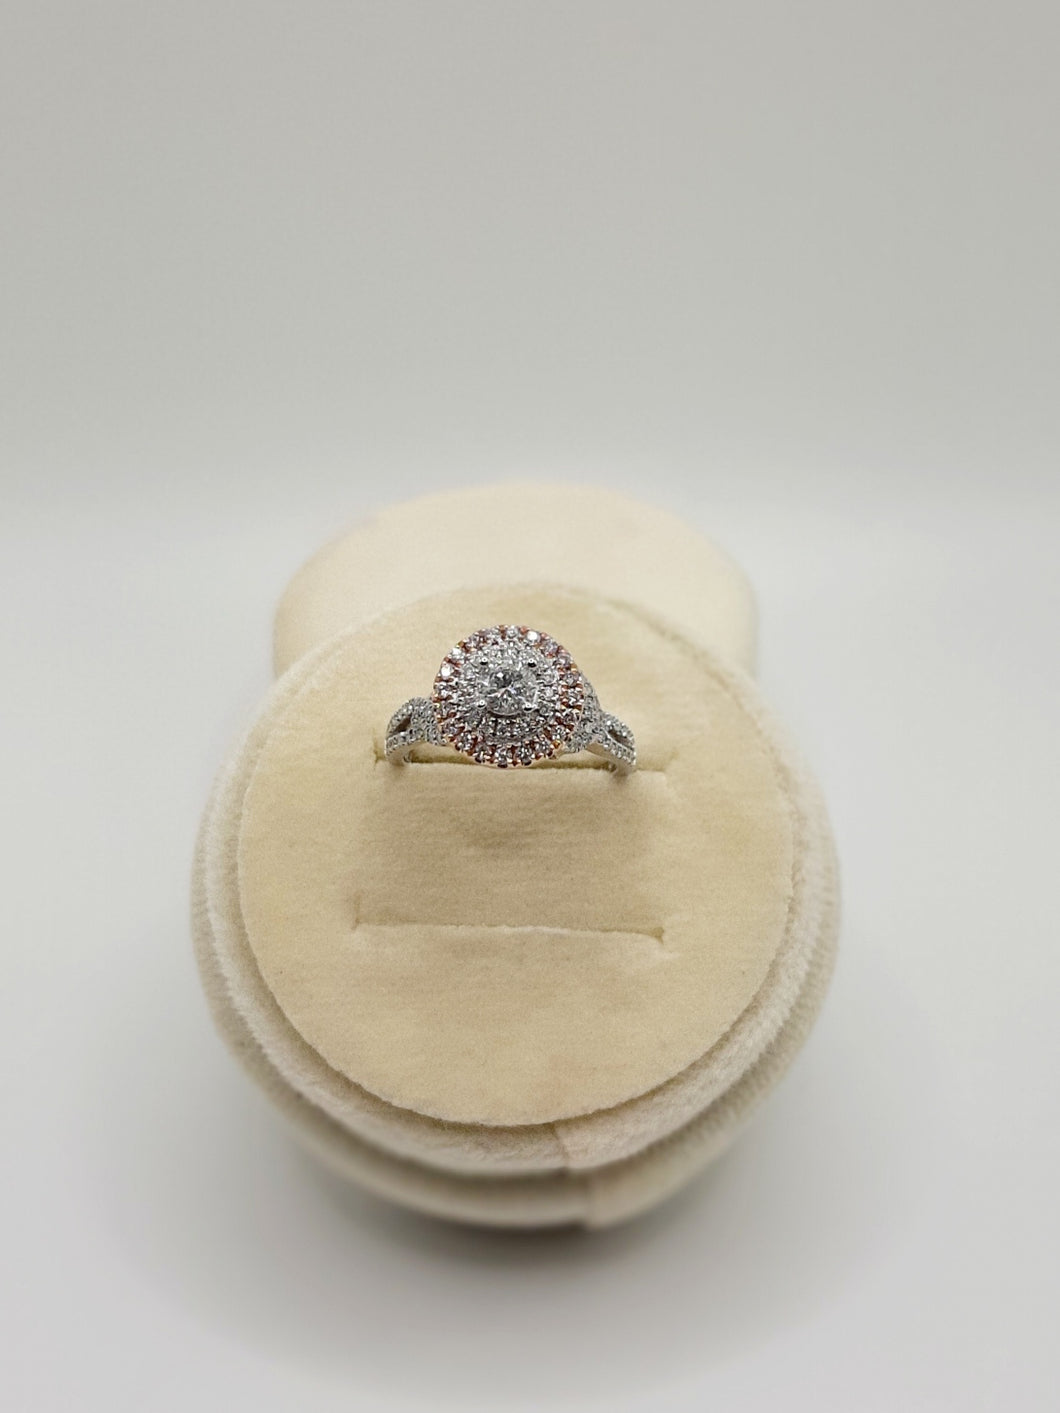 14Kt Two Tone Engagement Ring Featuring A .30 Carat Round Brilliant Cut Center Diamond Surrounded By A Double Halo Featuring 1/3 Carts of Natural Pink Diamonds and .15 Carats of Natural White Diamonds.